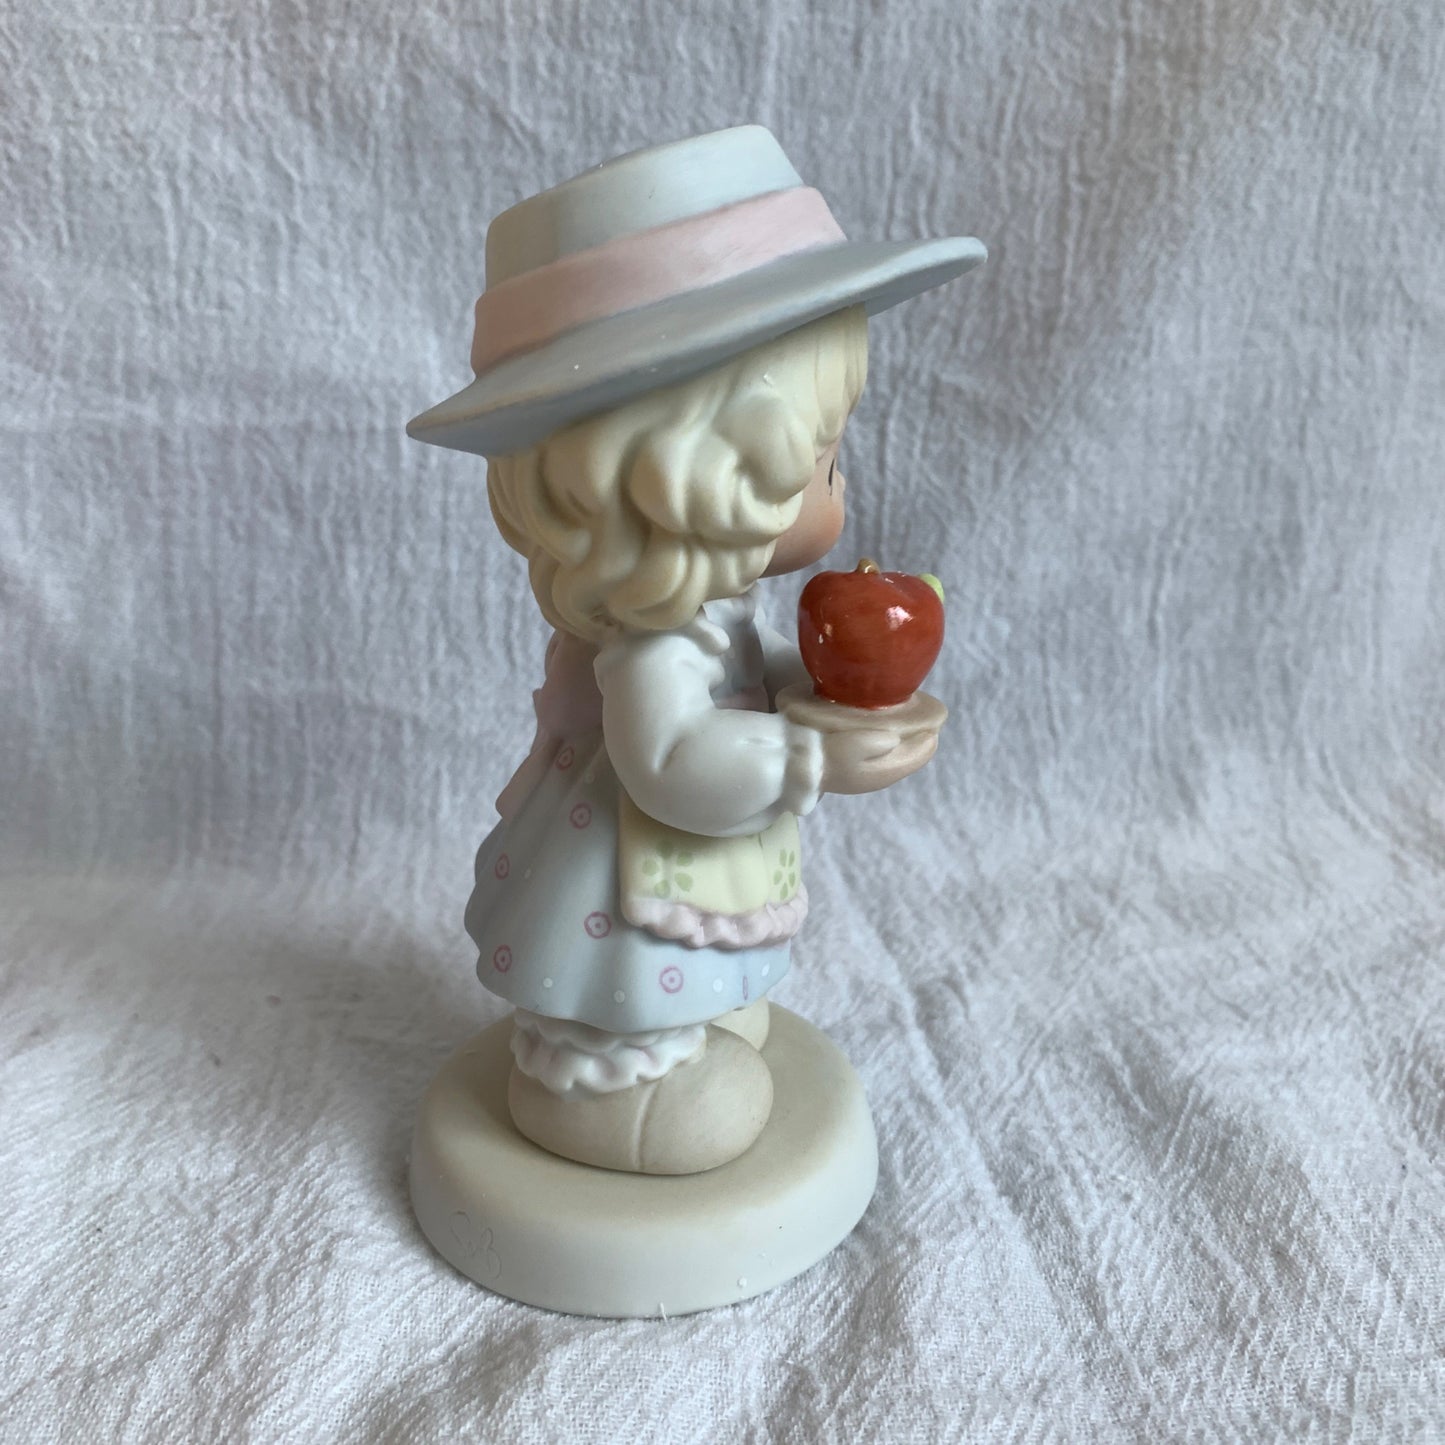 Precious Moments 115915 You Are the Apple of My Eye Figurine In Box